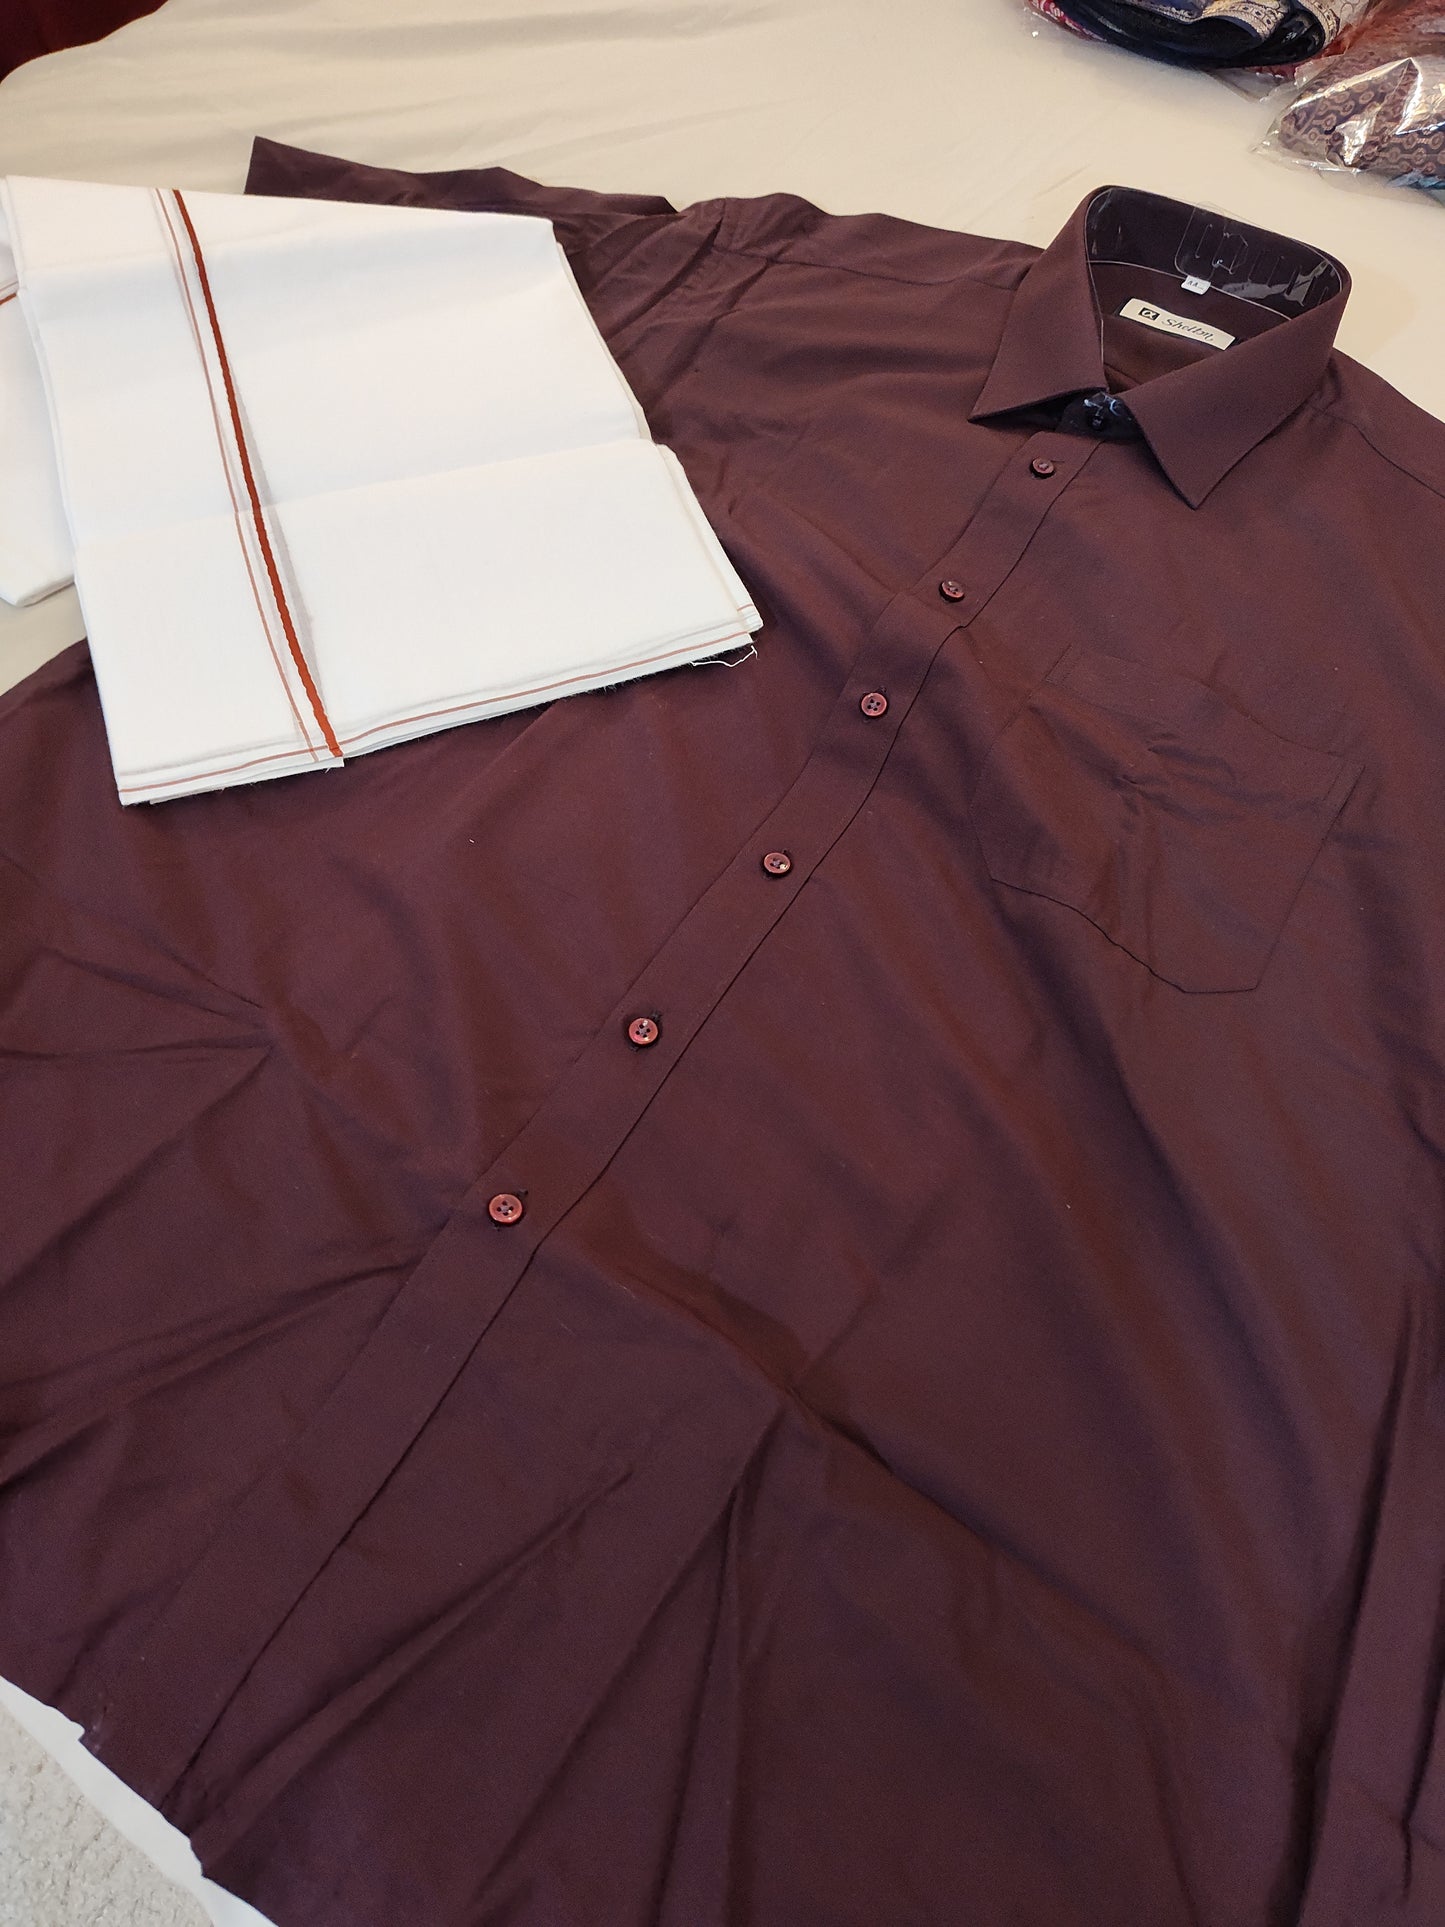 Attractive Burgundy Color Short Sleeves Shirt With Cotton Dhoti